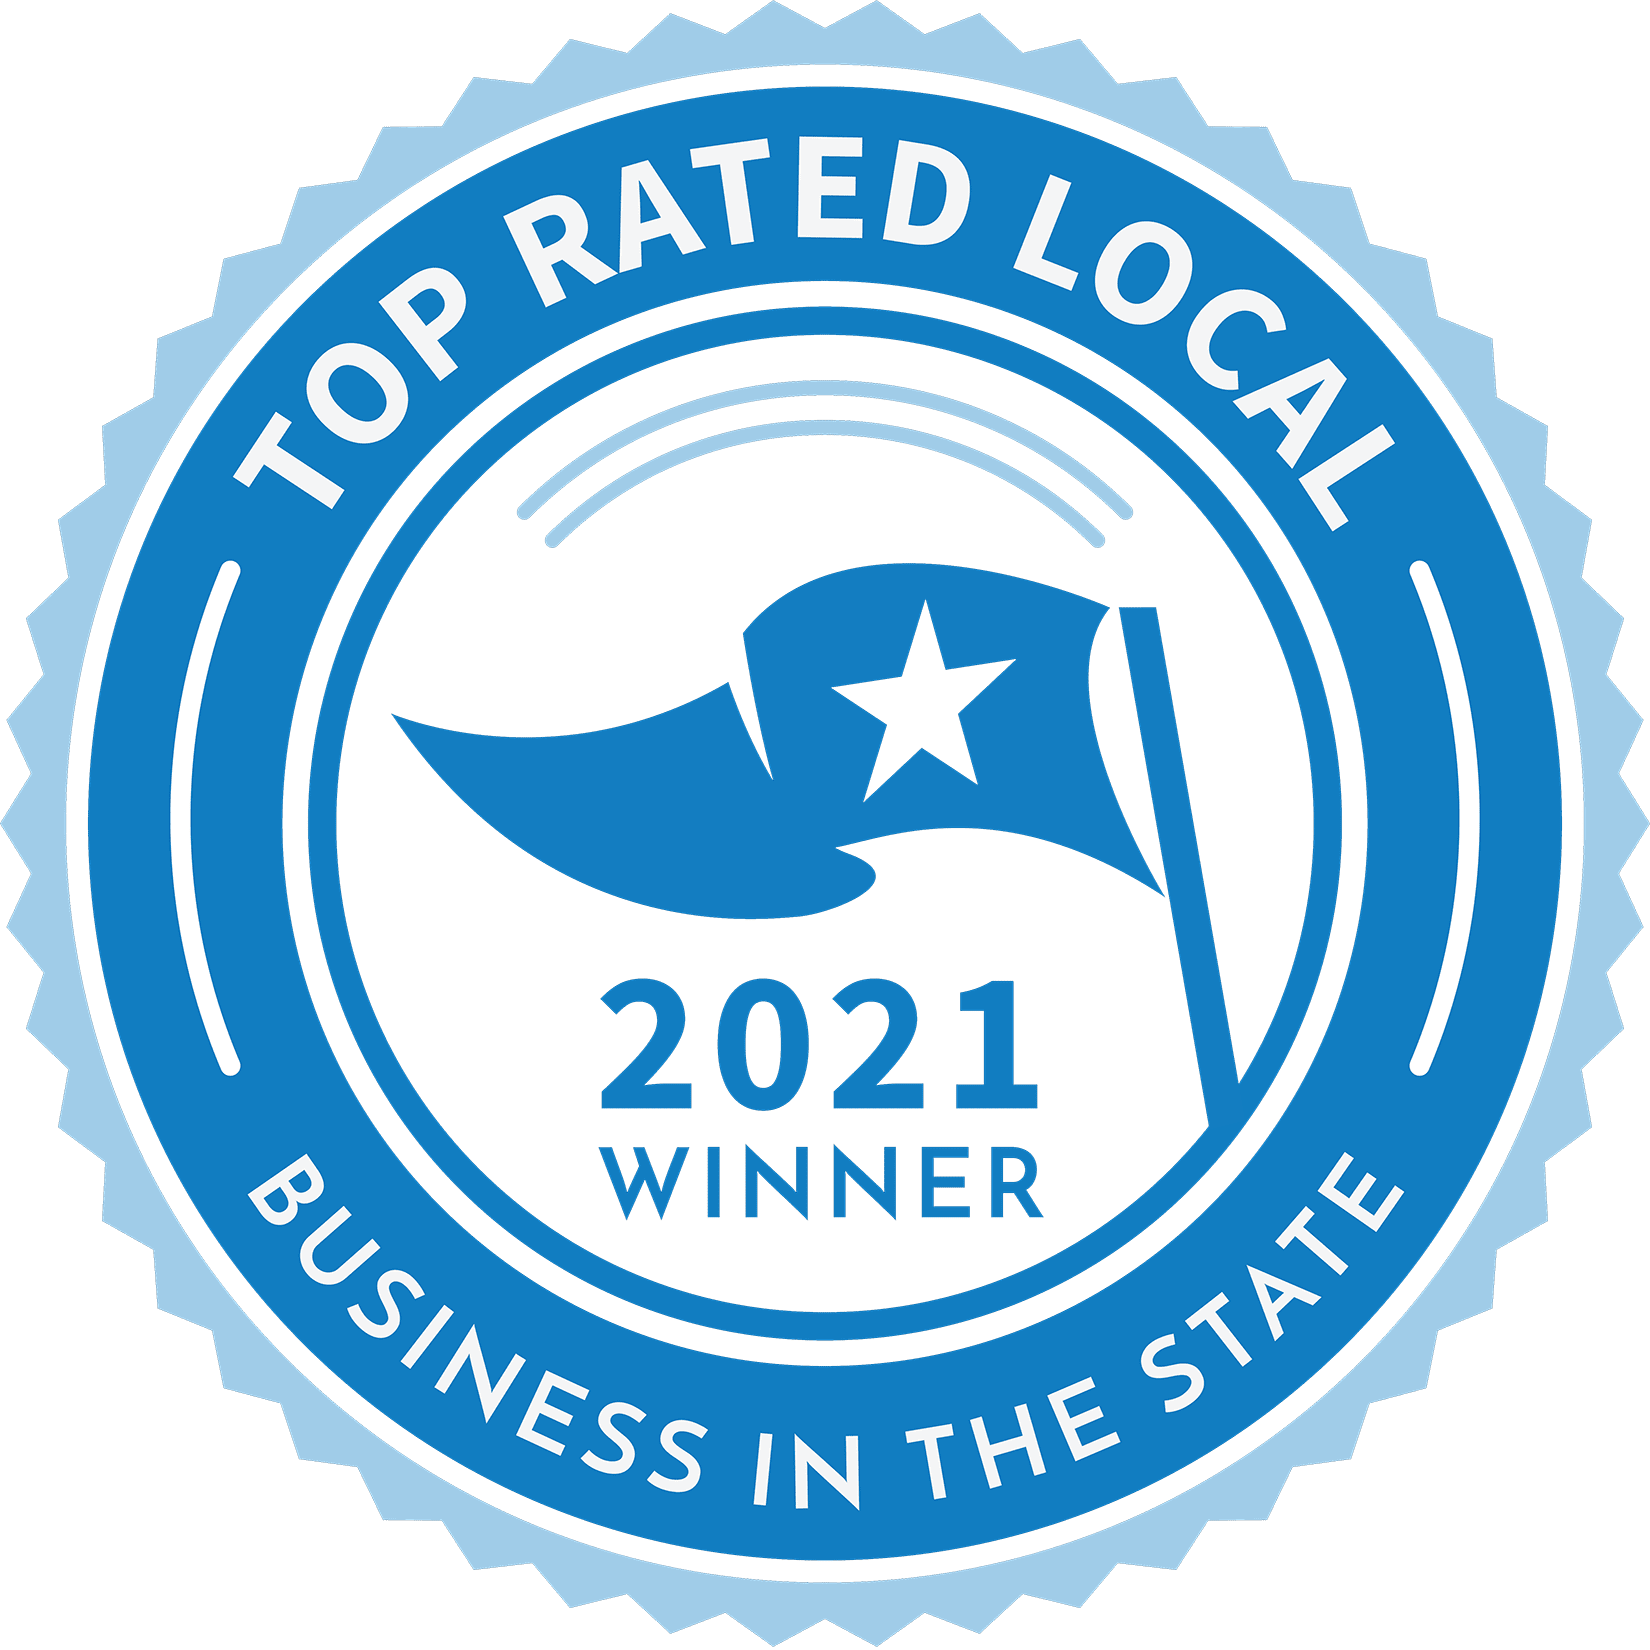 Top Rated Local 2021 Winner Logo